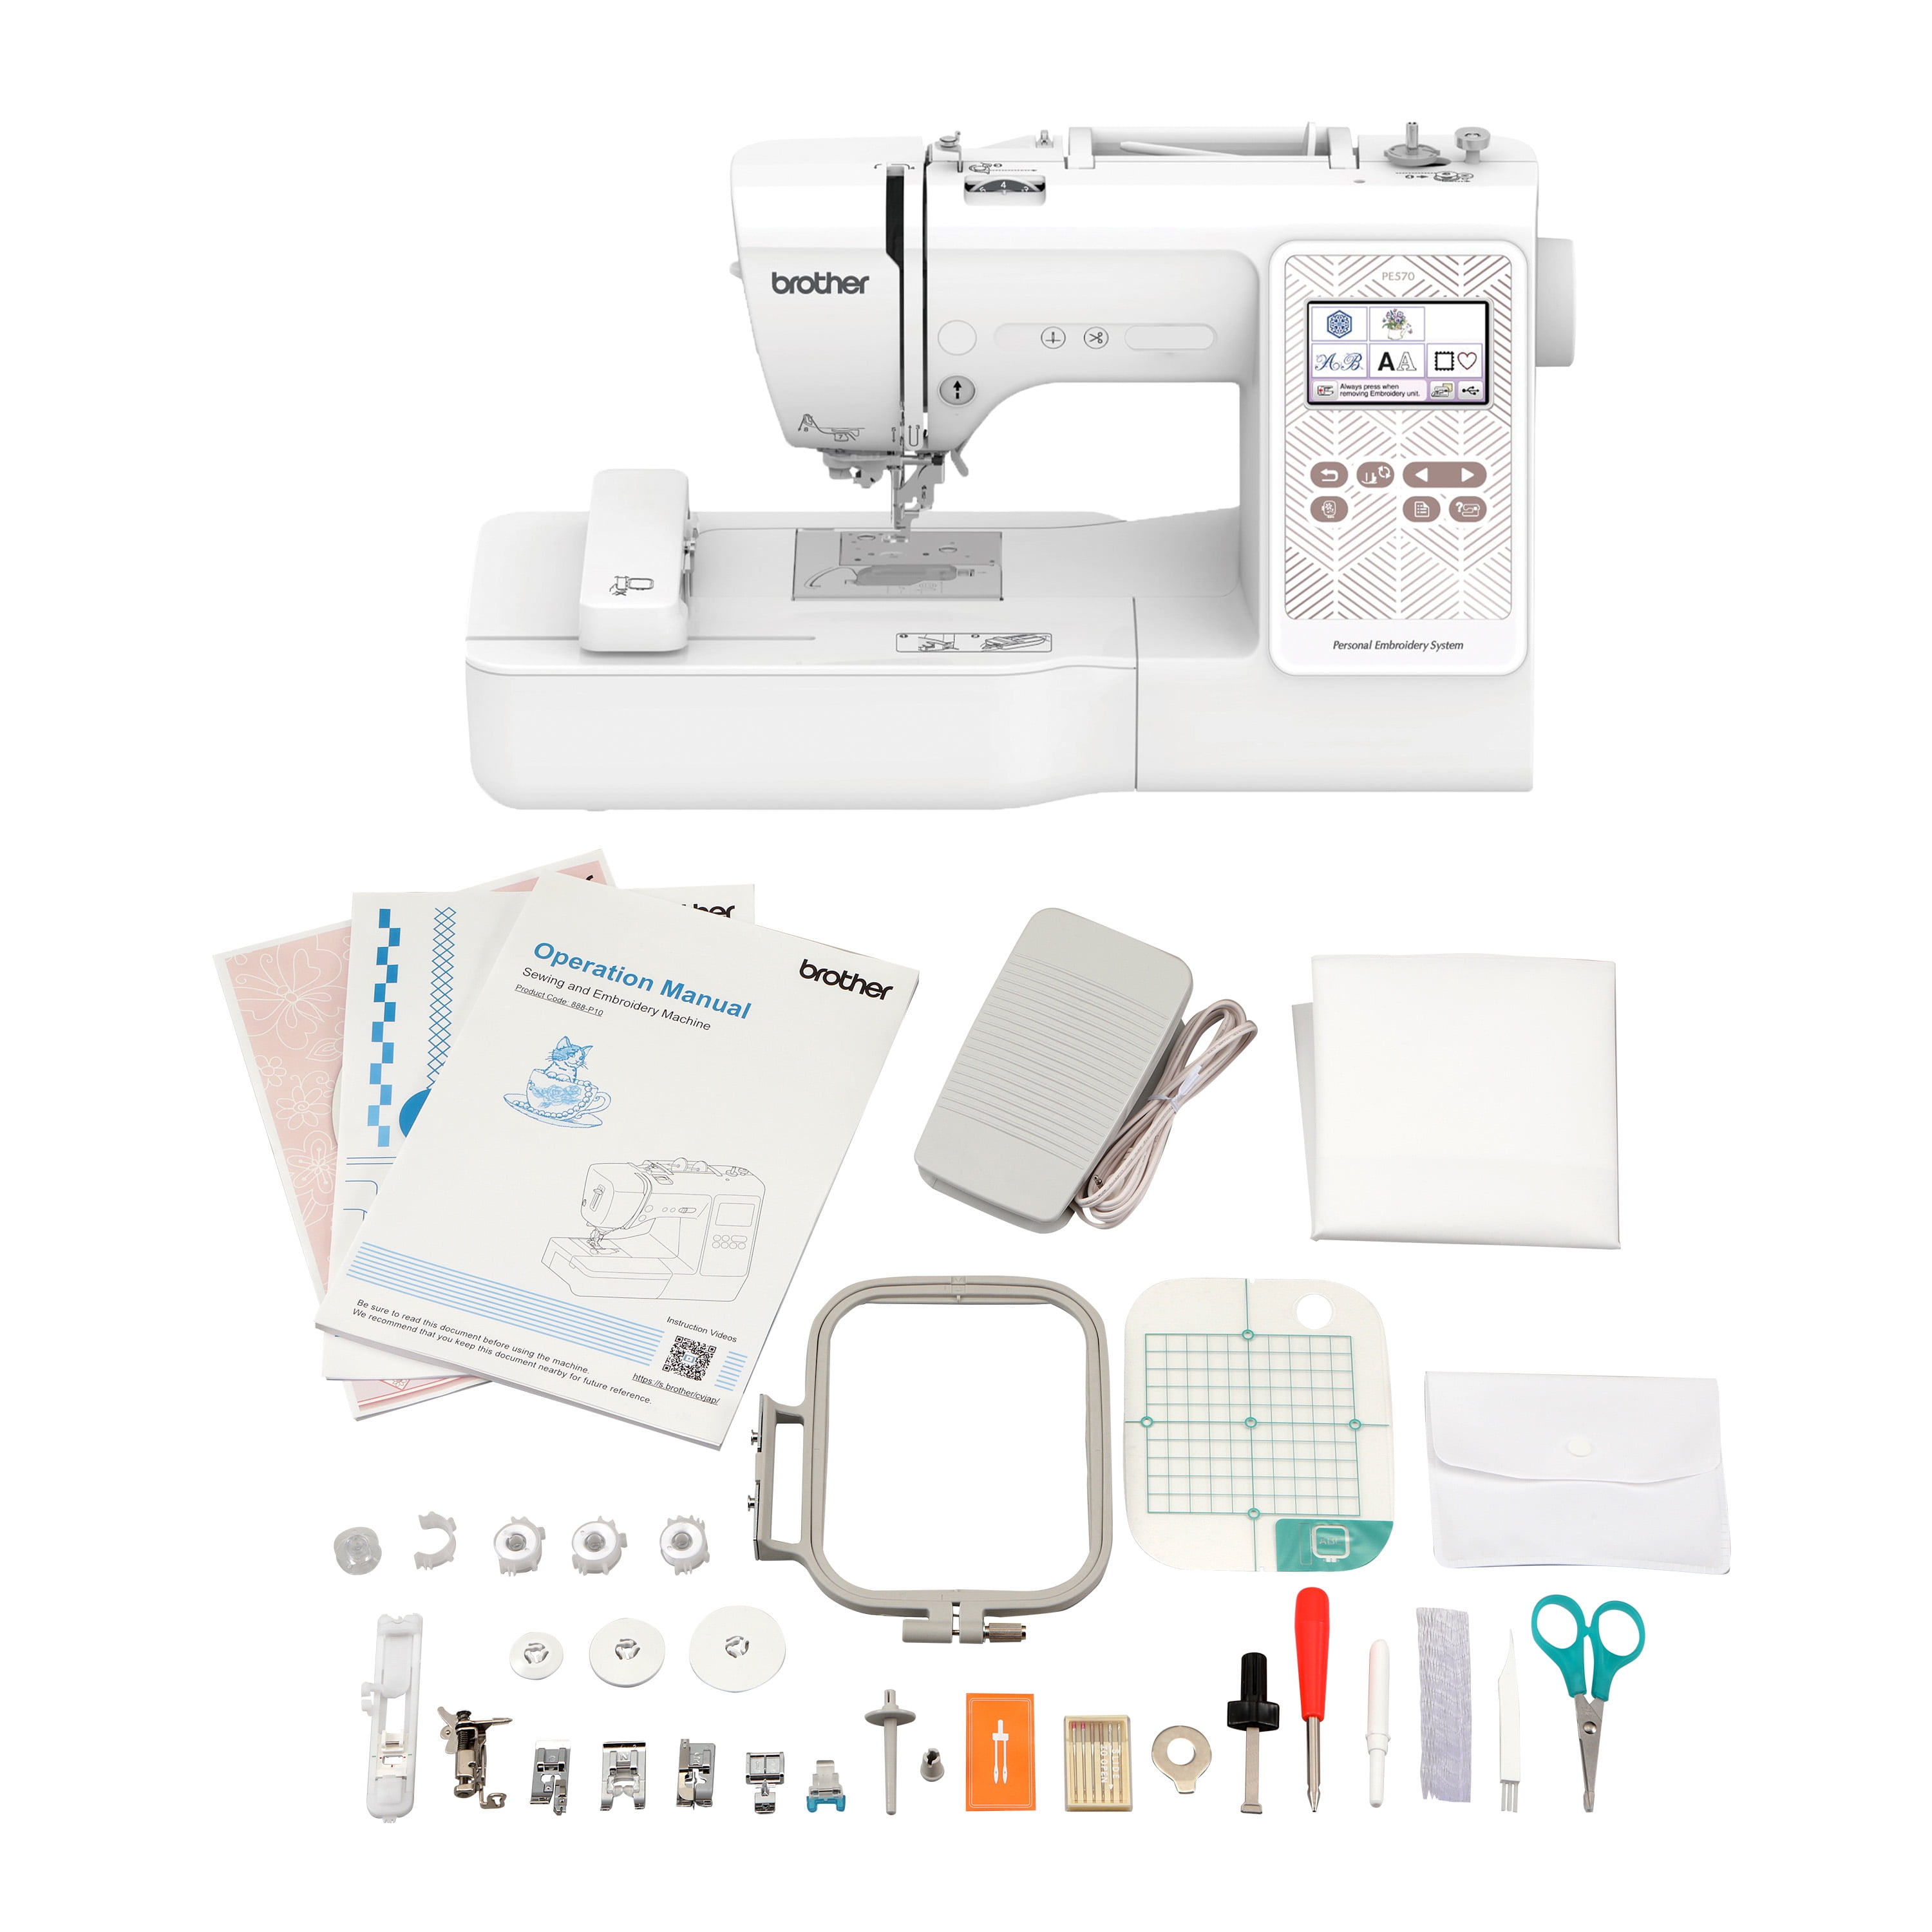 Best Embroidery Machine for beginners - Brother SE600 